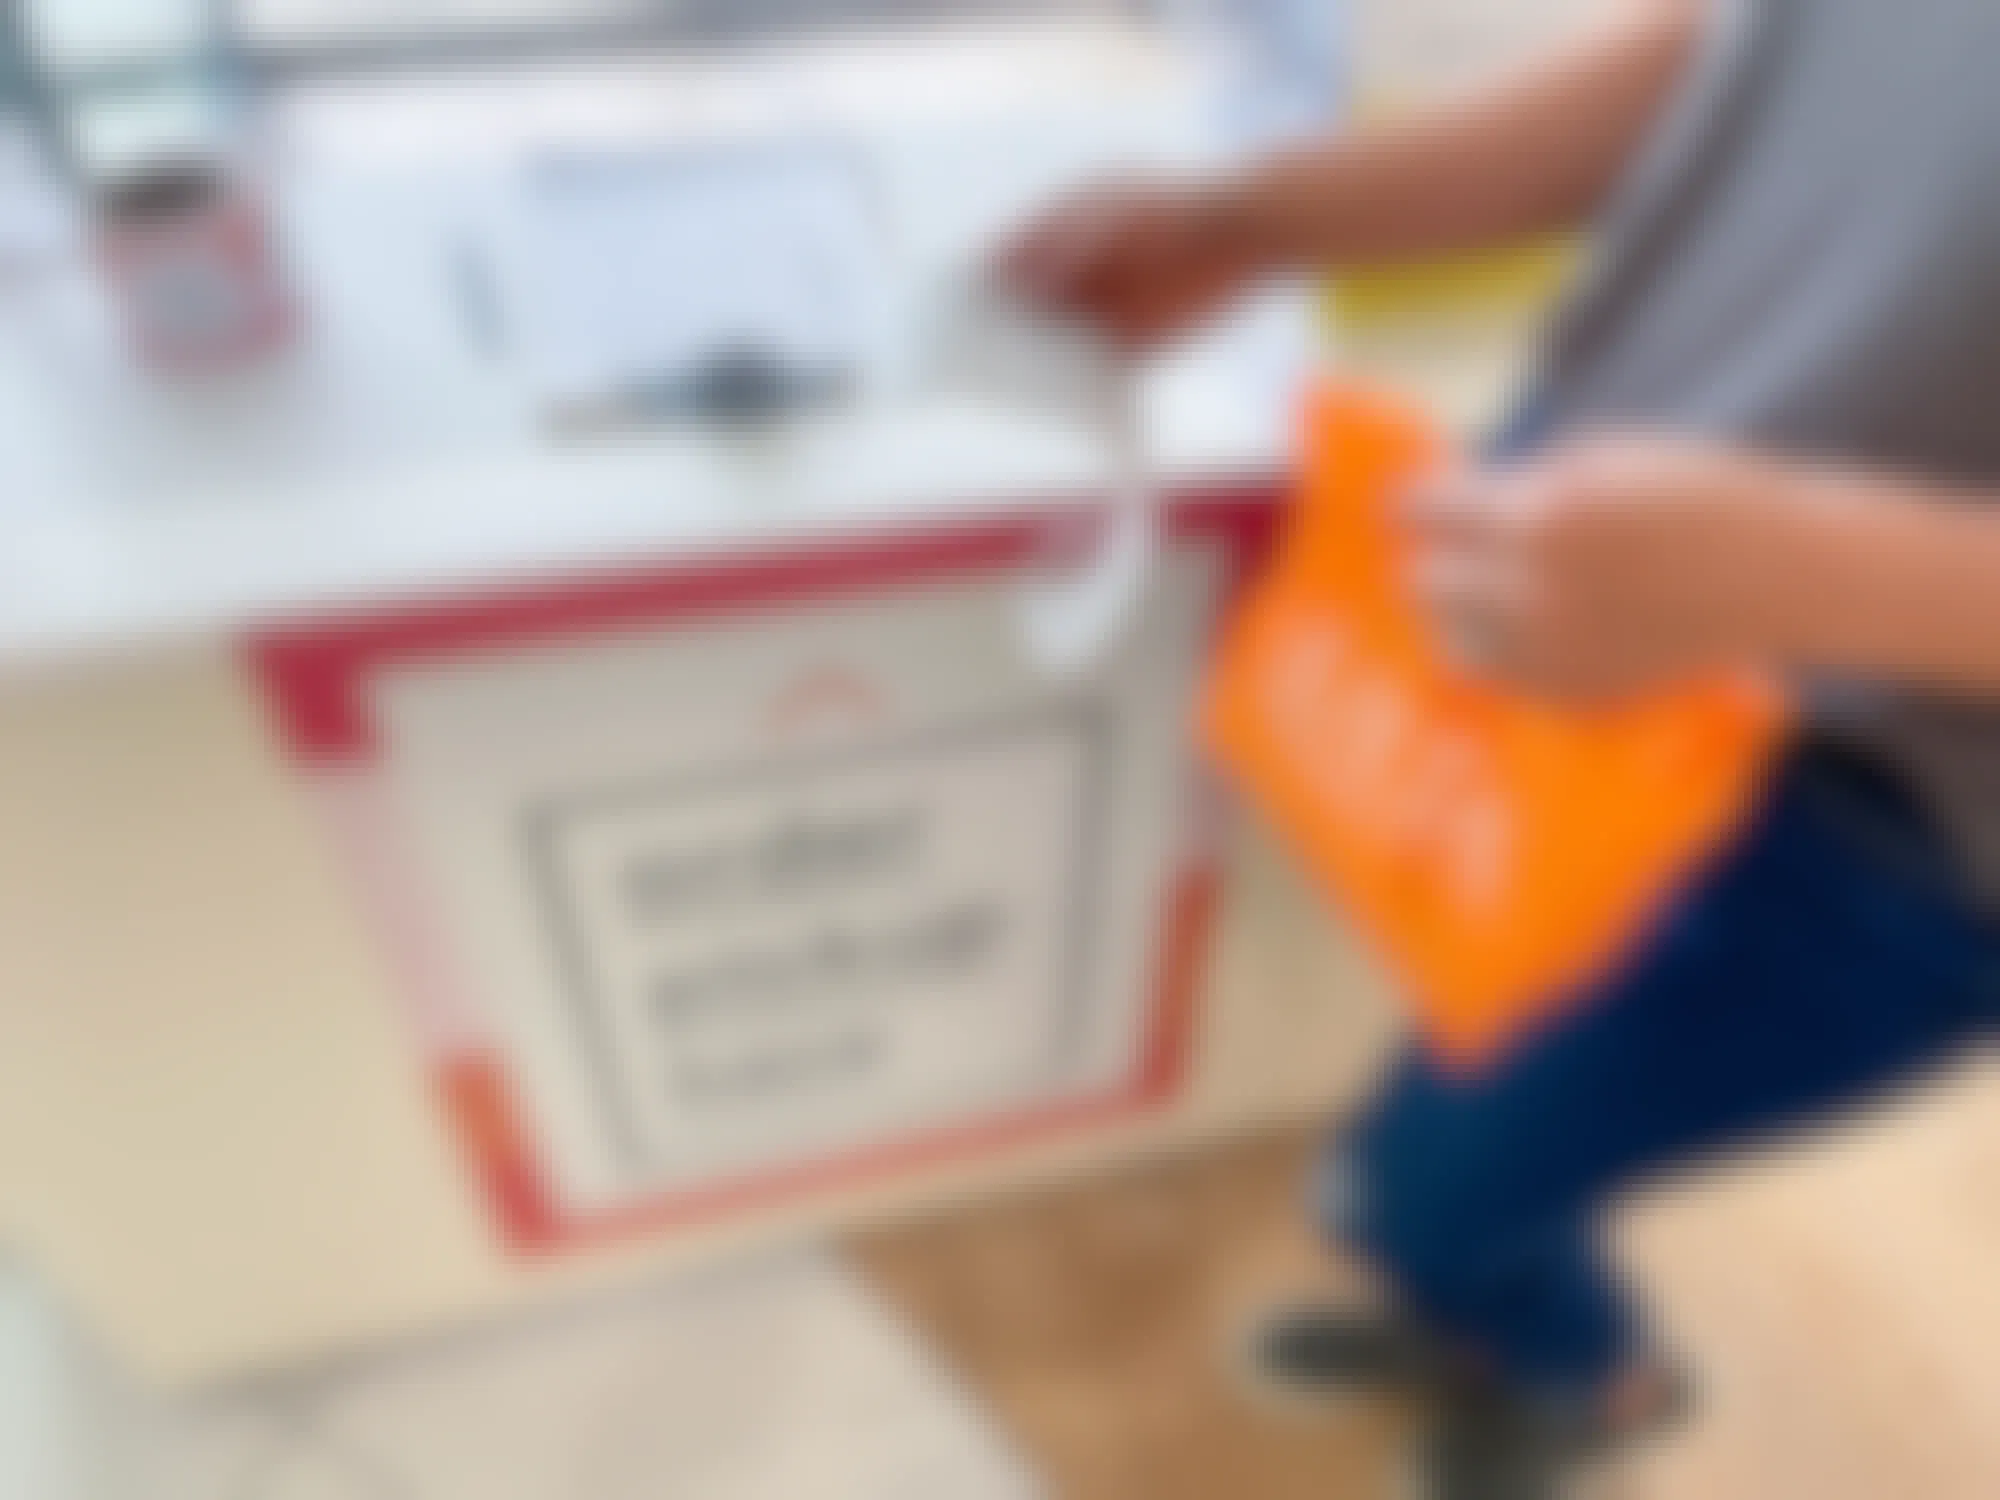 A person holding up a bag of items purchased and receipt from Ulta near the Order Pickup counter of an Ulta store